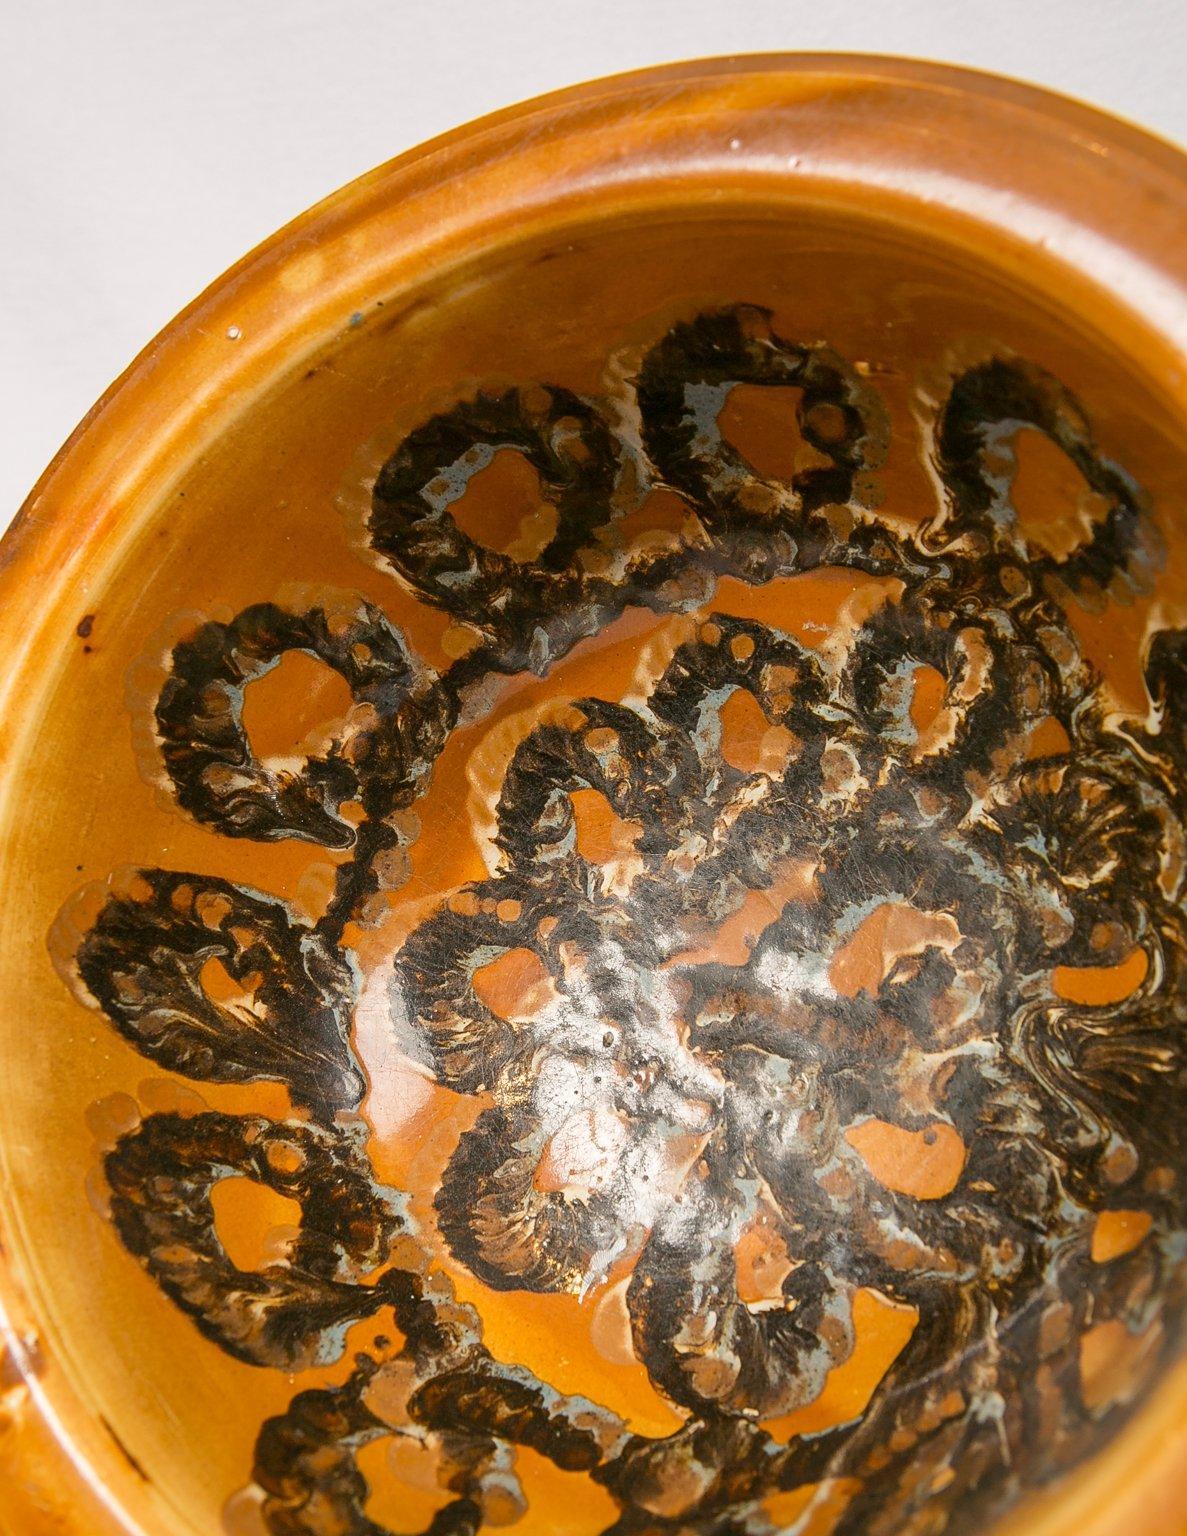 Glazed Large Mochaware Bowl with Both Cable and Marbled Decoration